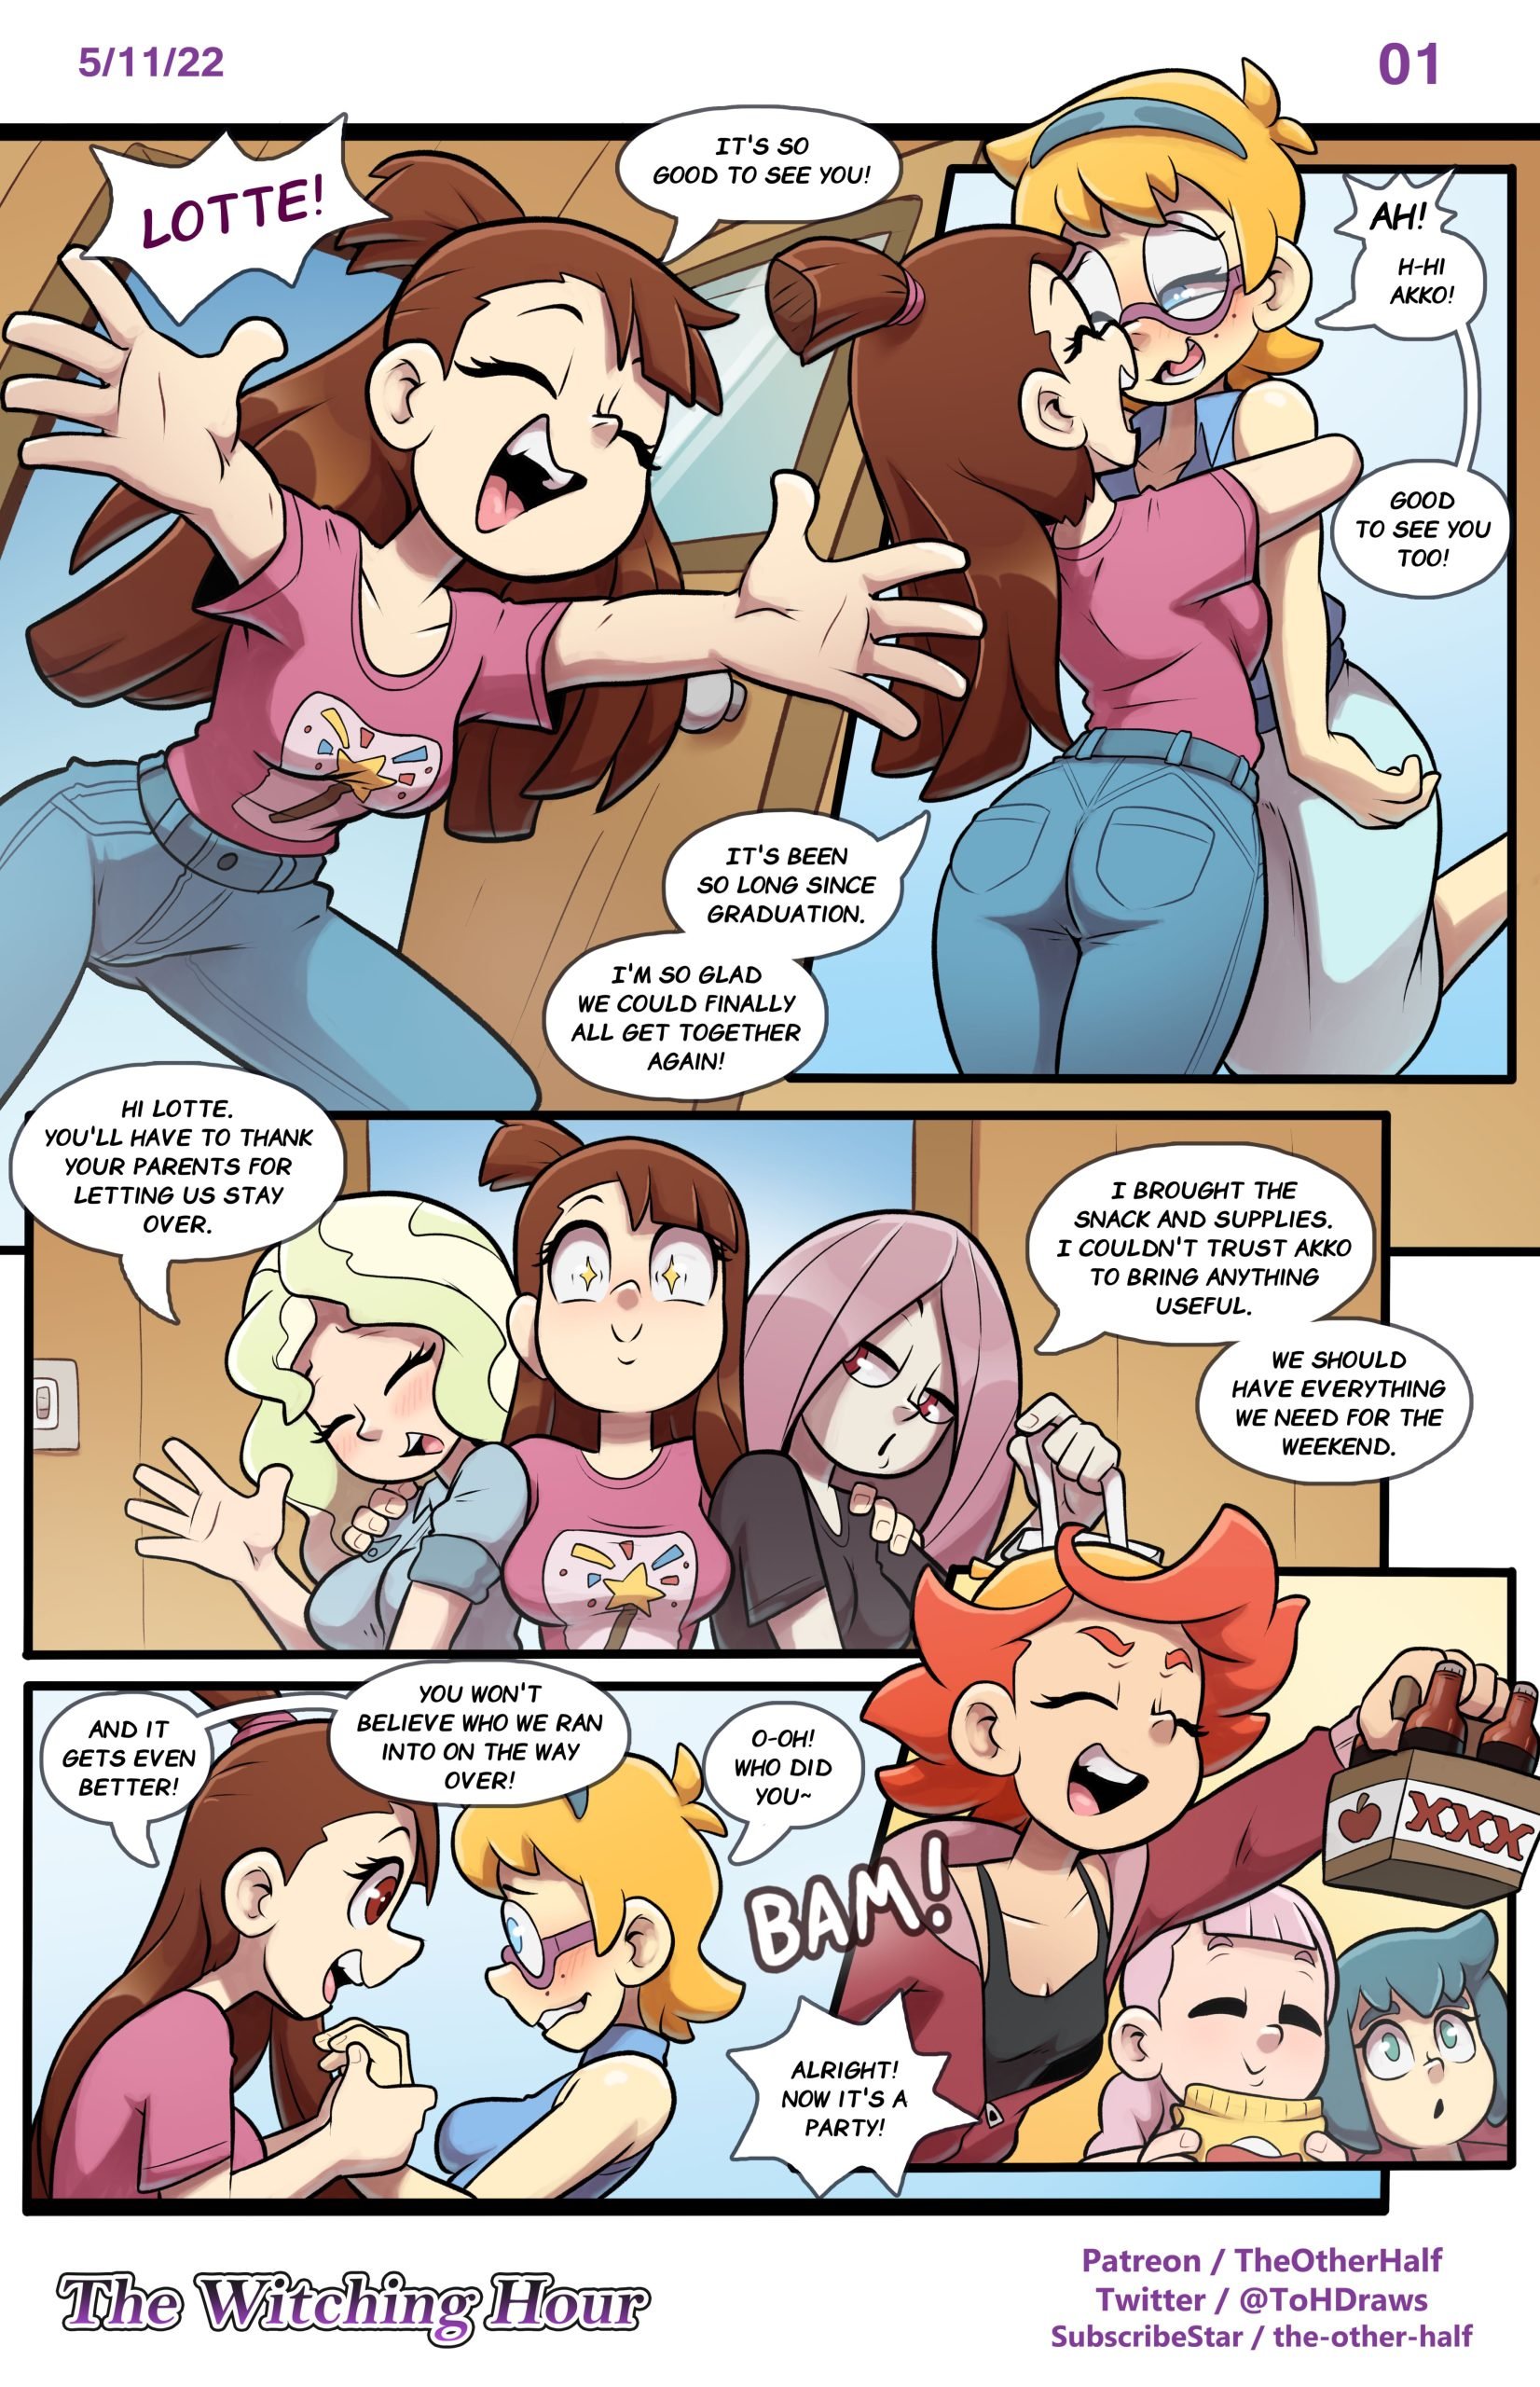 The Witching Hour (Little Witch Academia) TheOtherHalf Porn Comic